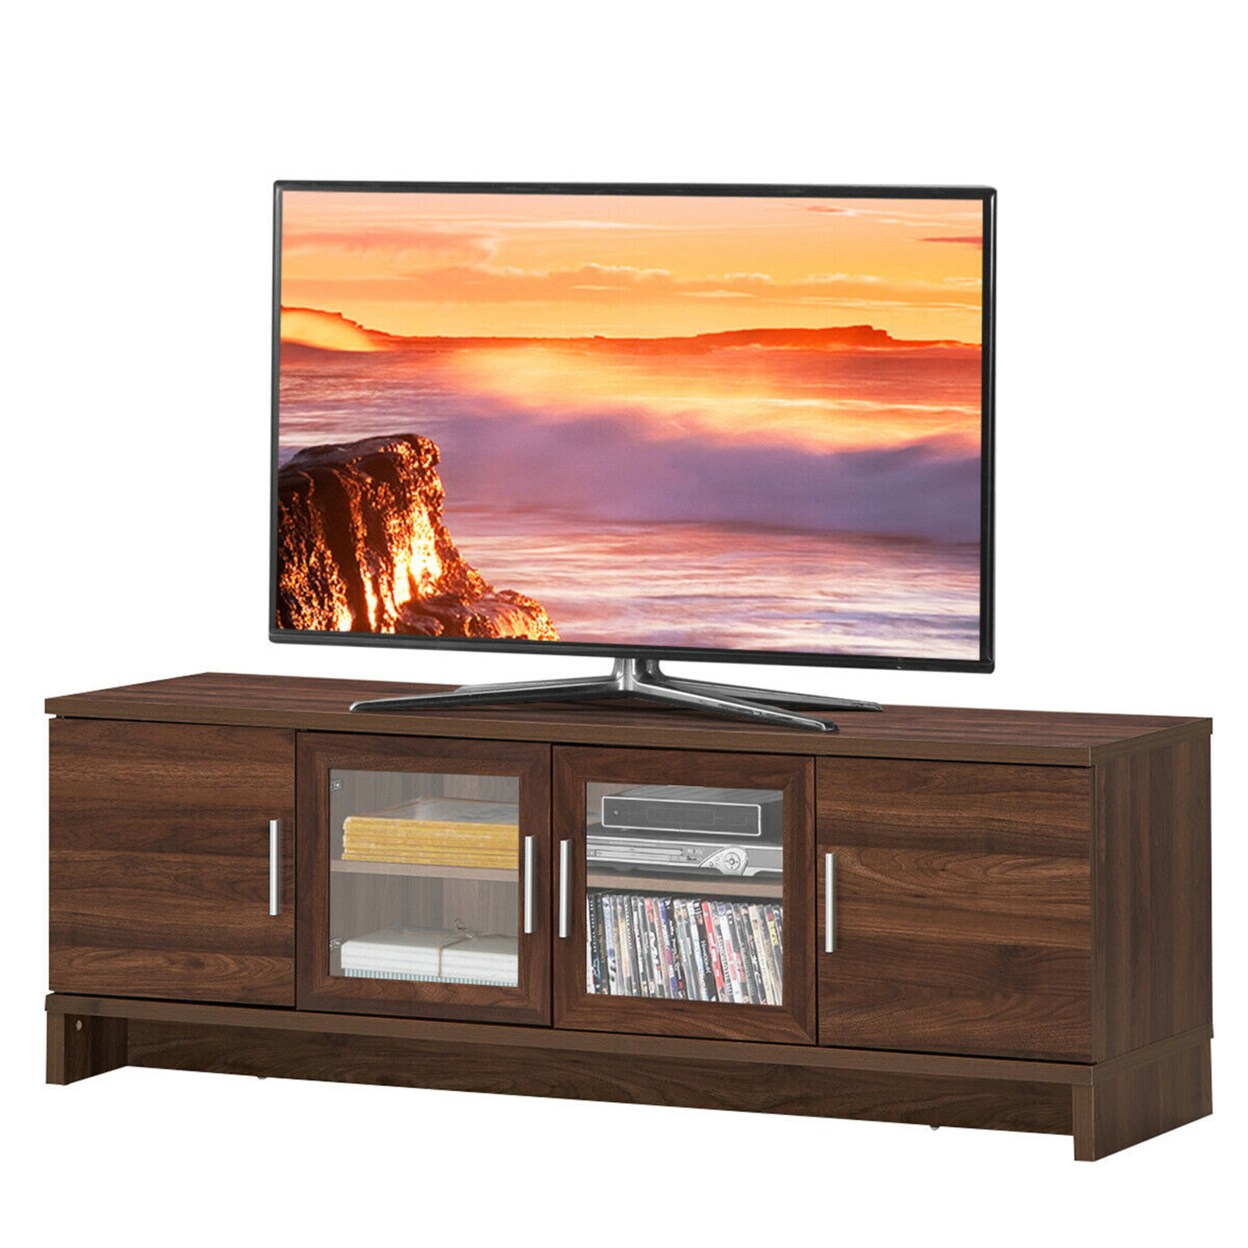 Gymax TV Stand Media Entertainment Center for TVs up to 70 w/ Storage Cabinet Walnut